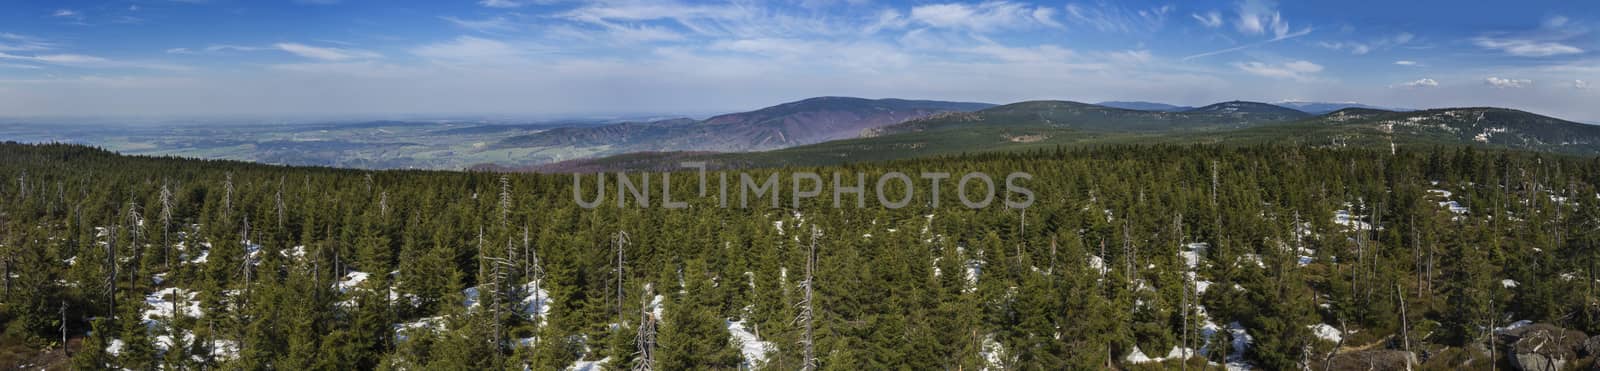 Jizera Mountains jizerske hory panoramic landscape, view from ridge of holubnik mountain with lush green spruce forest, trees, boulders and blue sky background, springtime with snow remains.